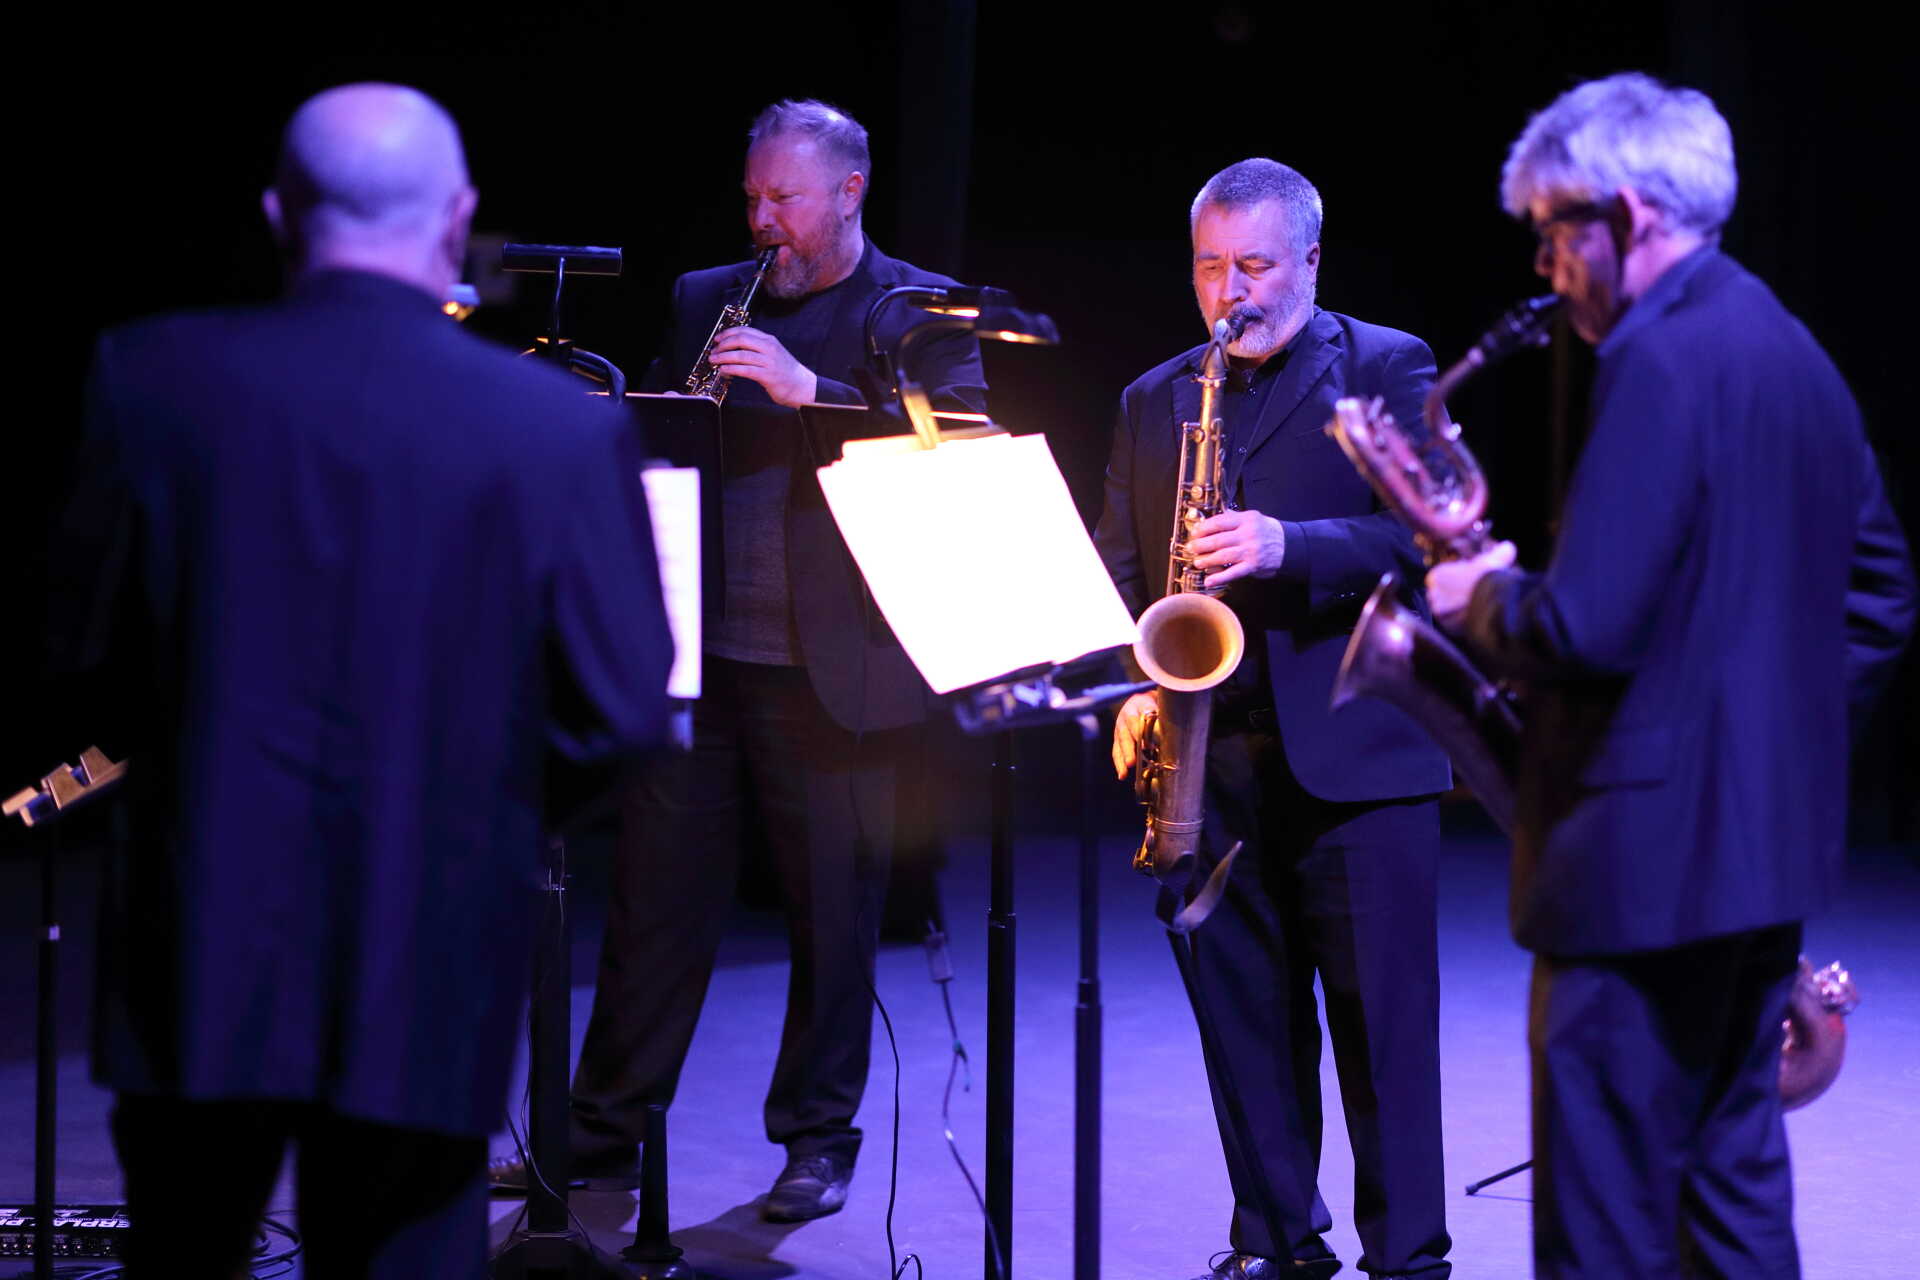 Four male saxophonists performing in purple-hued stage-lighting